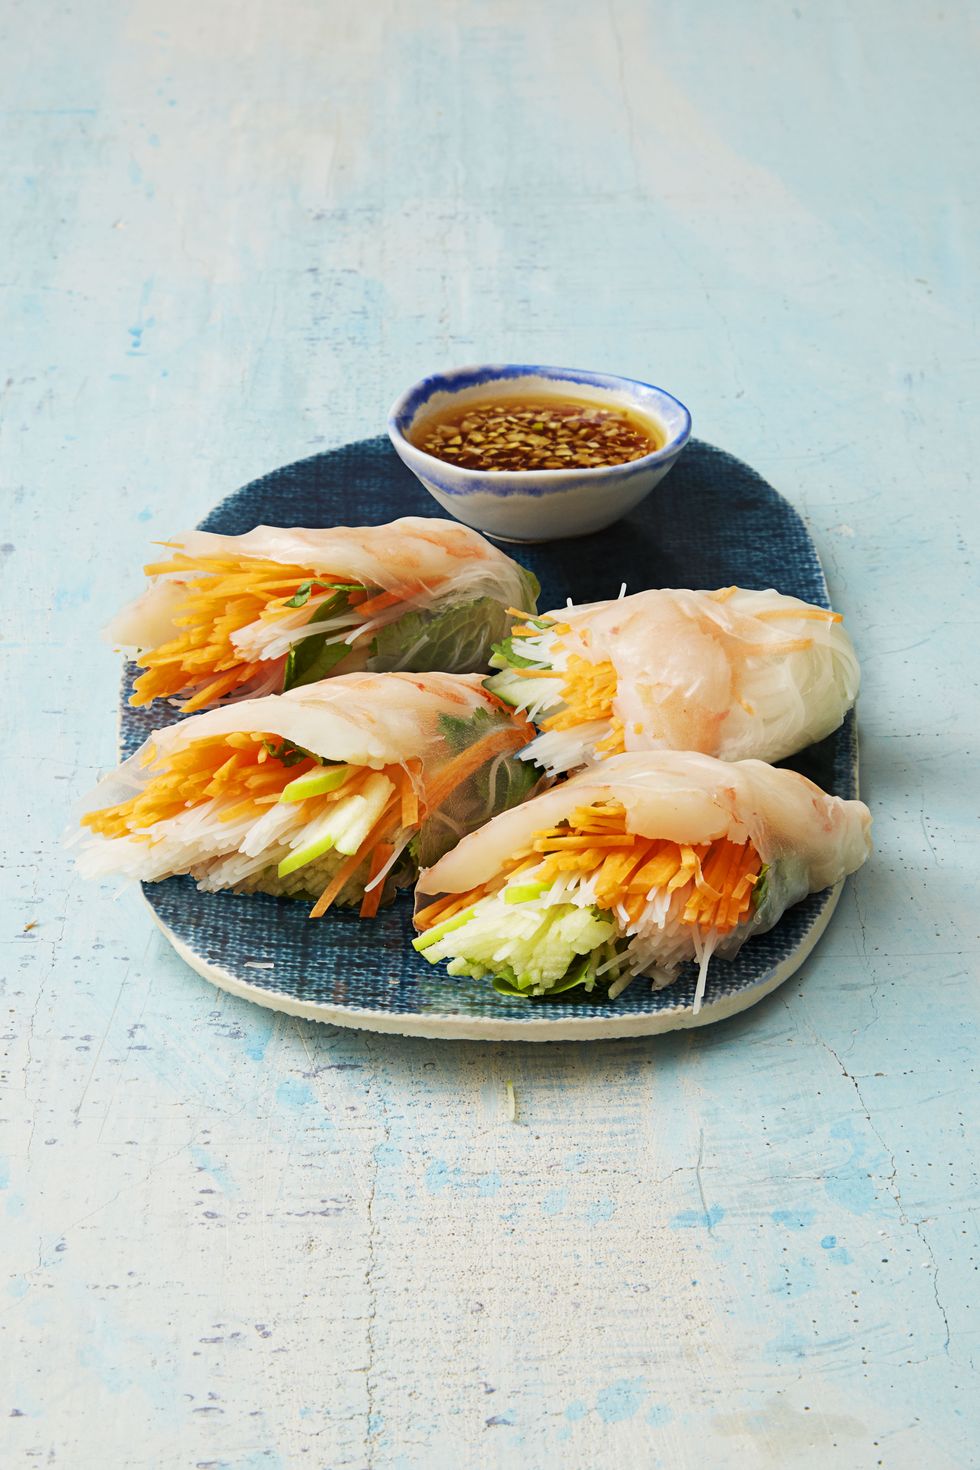 How to Wrap Spring Rolls: Both Chinese & Vietnamese! - The Woks of Life